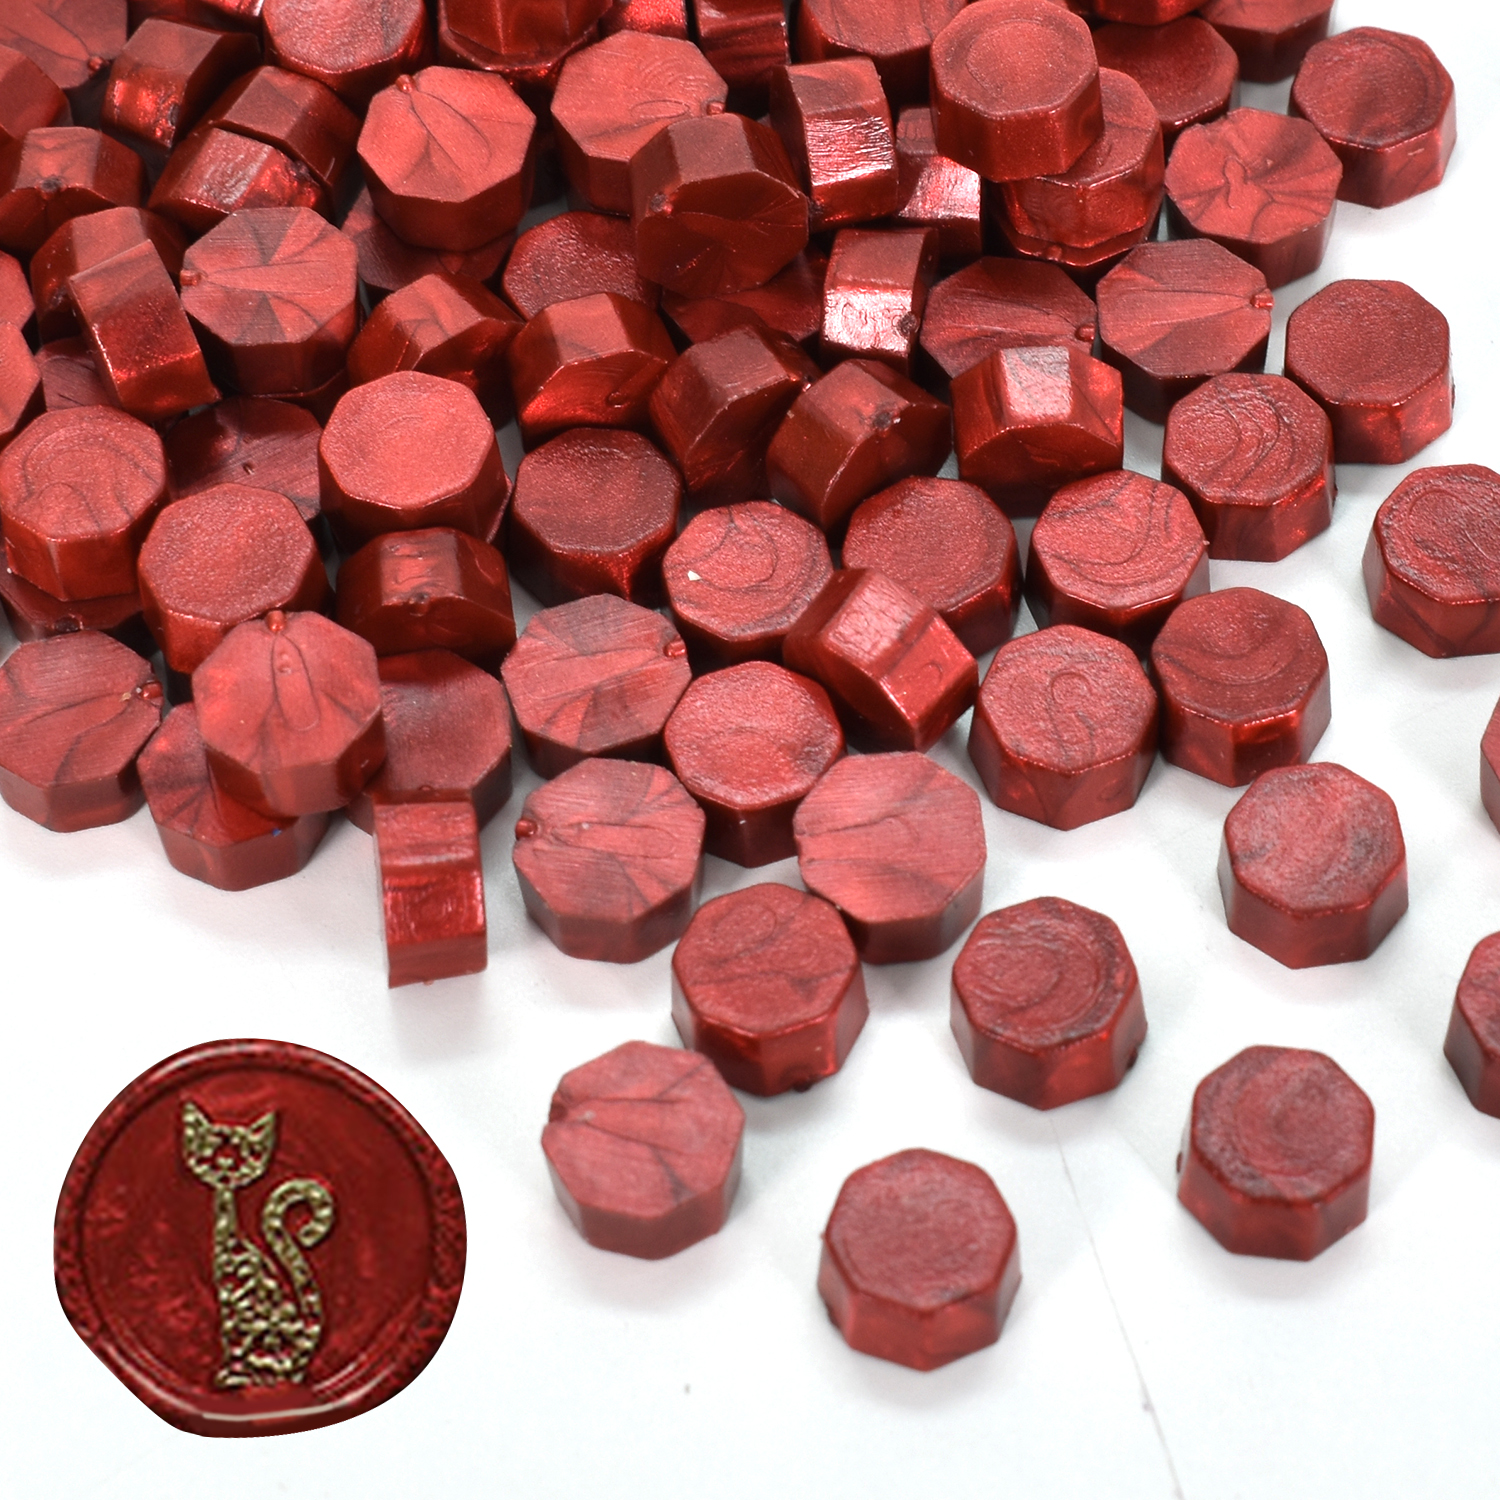 320 Pcs Sealing Wax Beads, Octagon Wax Seal Beads, Wine Red Sealing Wax  Beads Kits for Wax Seal Stamp Crafts Letter Cards Sealing, with Wax Sealing